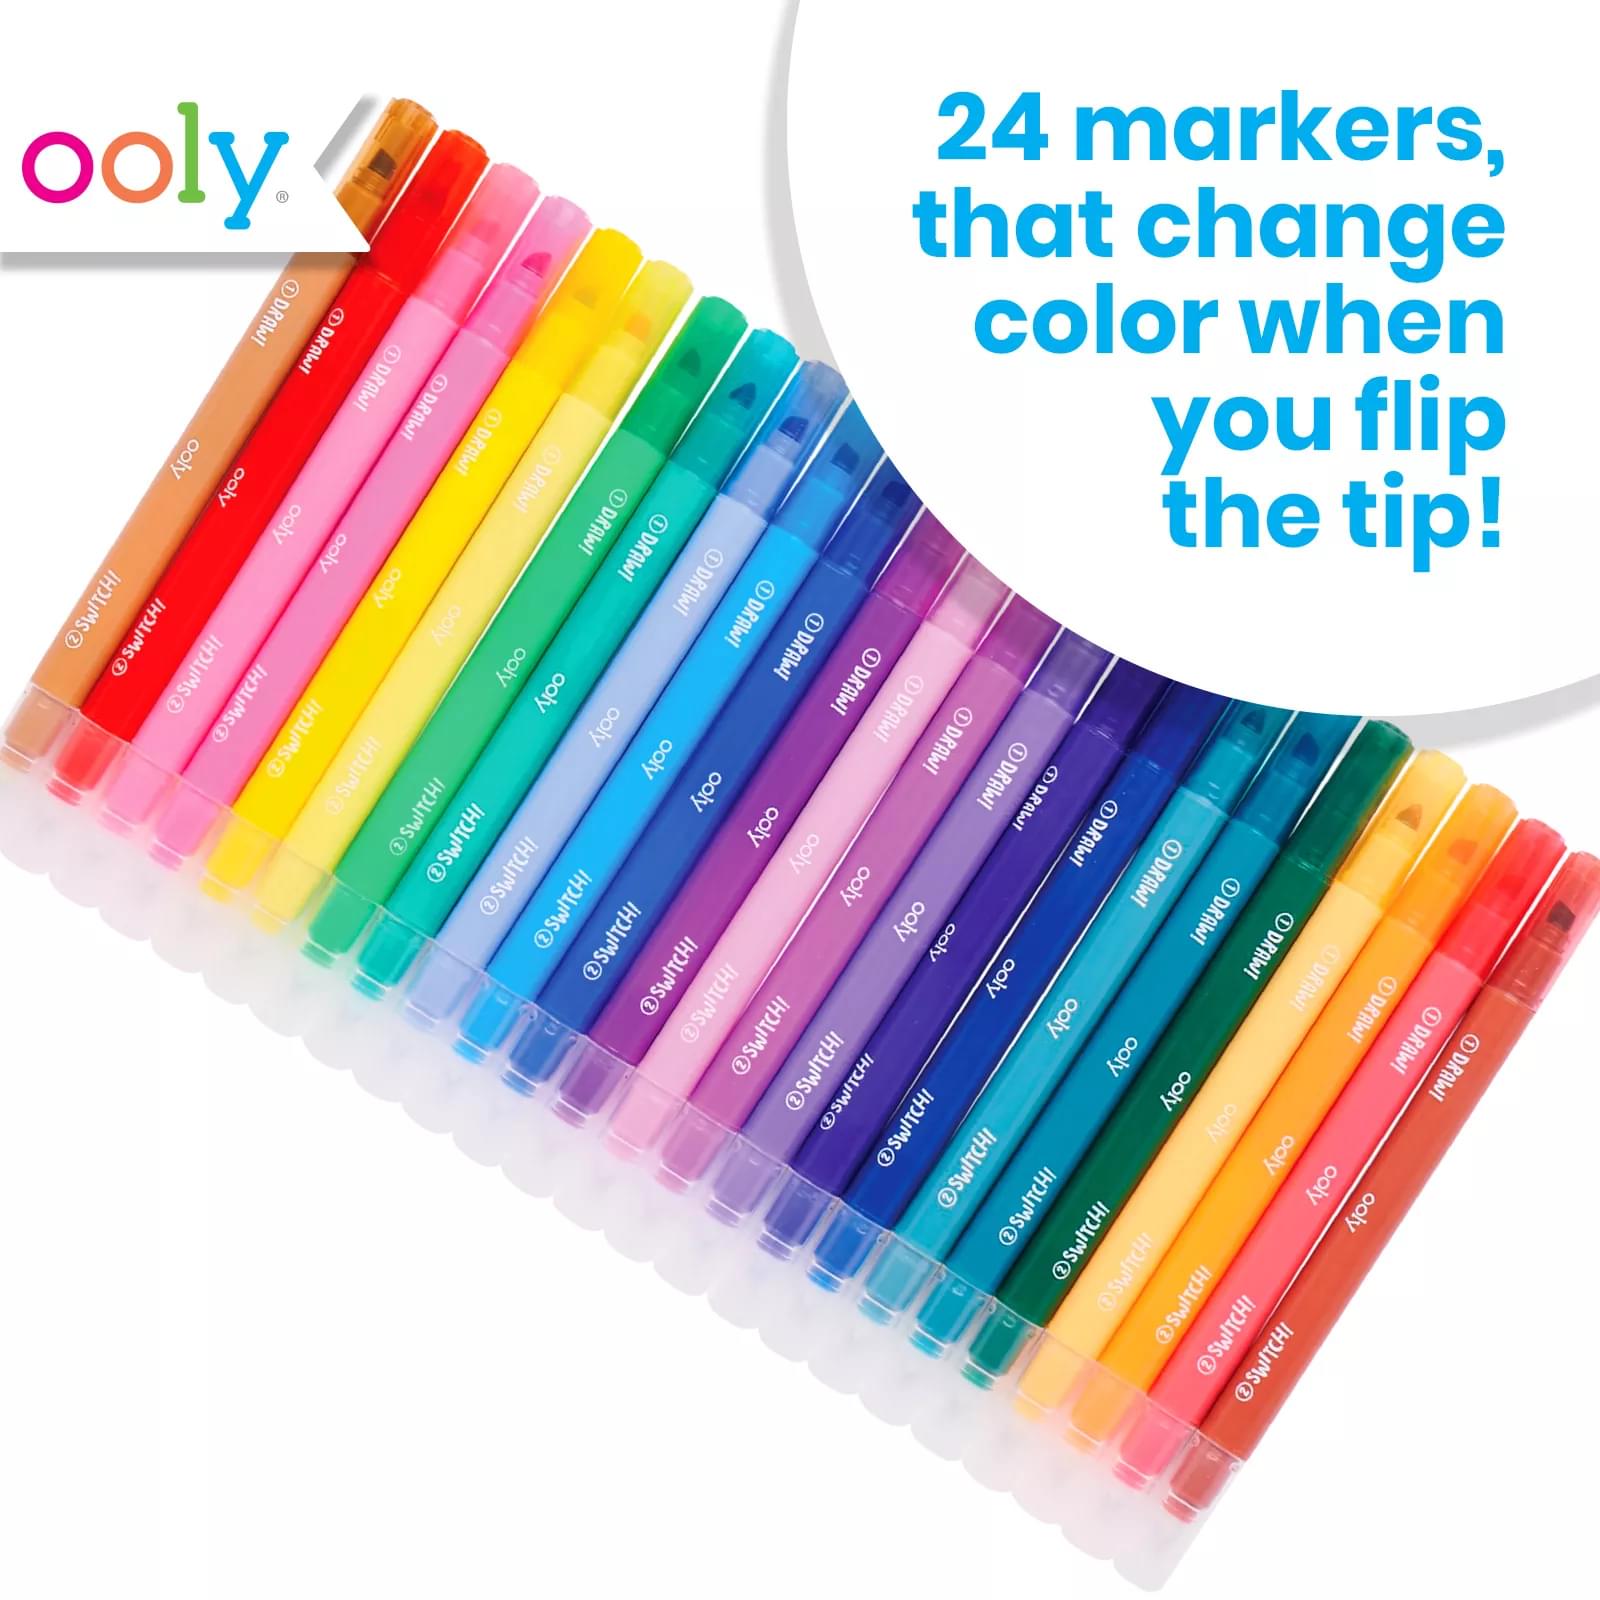 Ooly Switcheroo Color Changing Marker Set of 12 – Crush